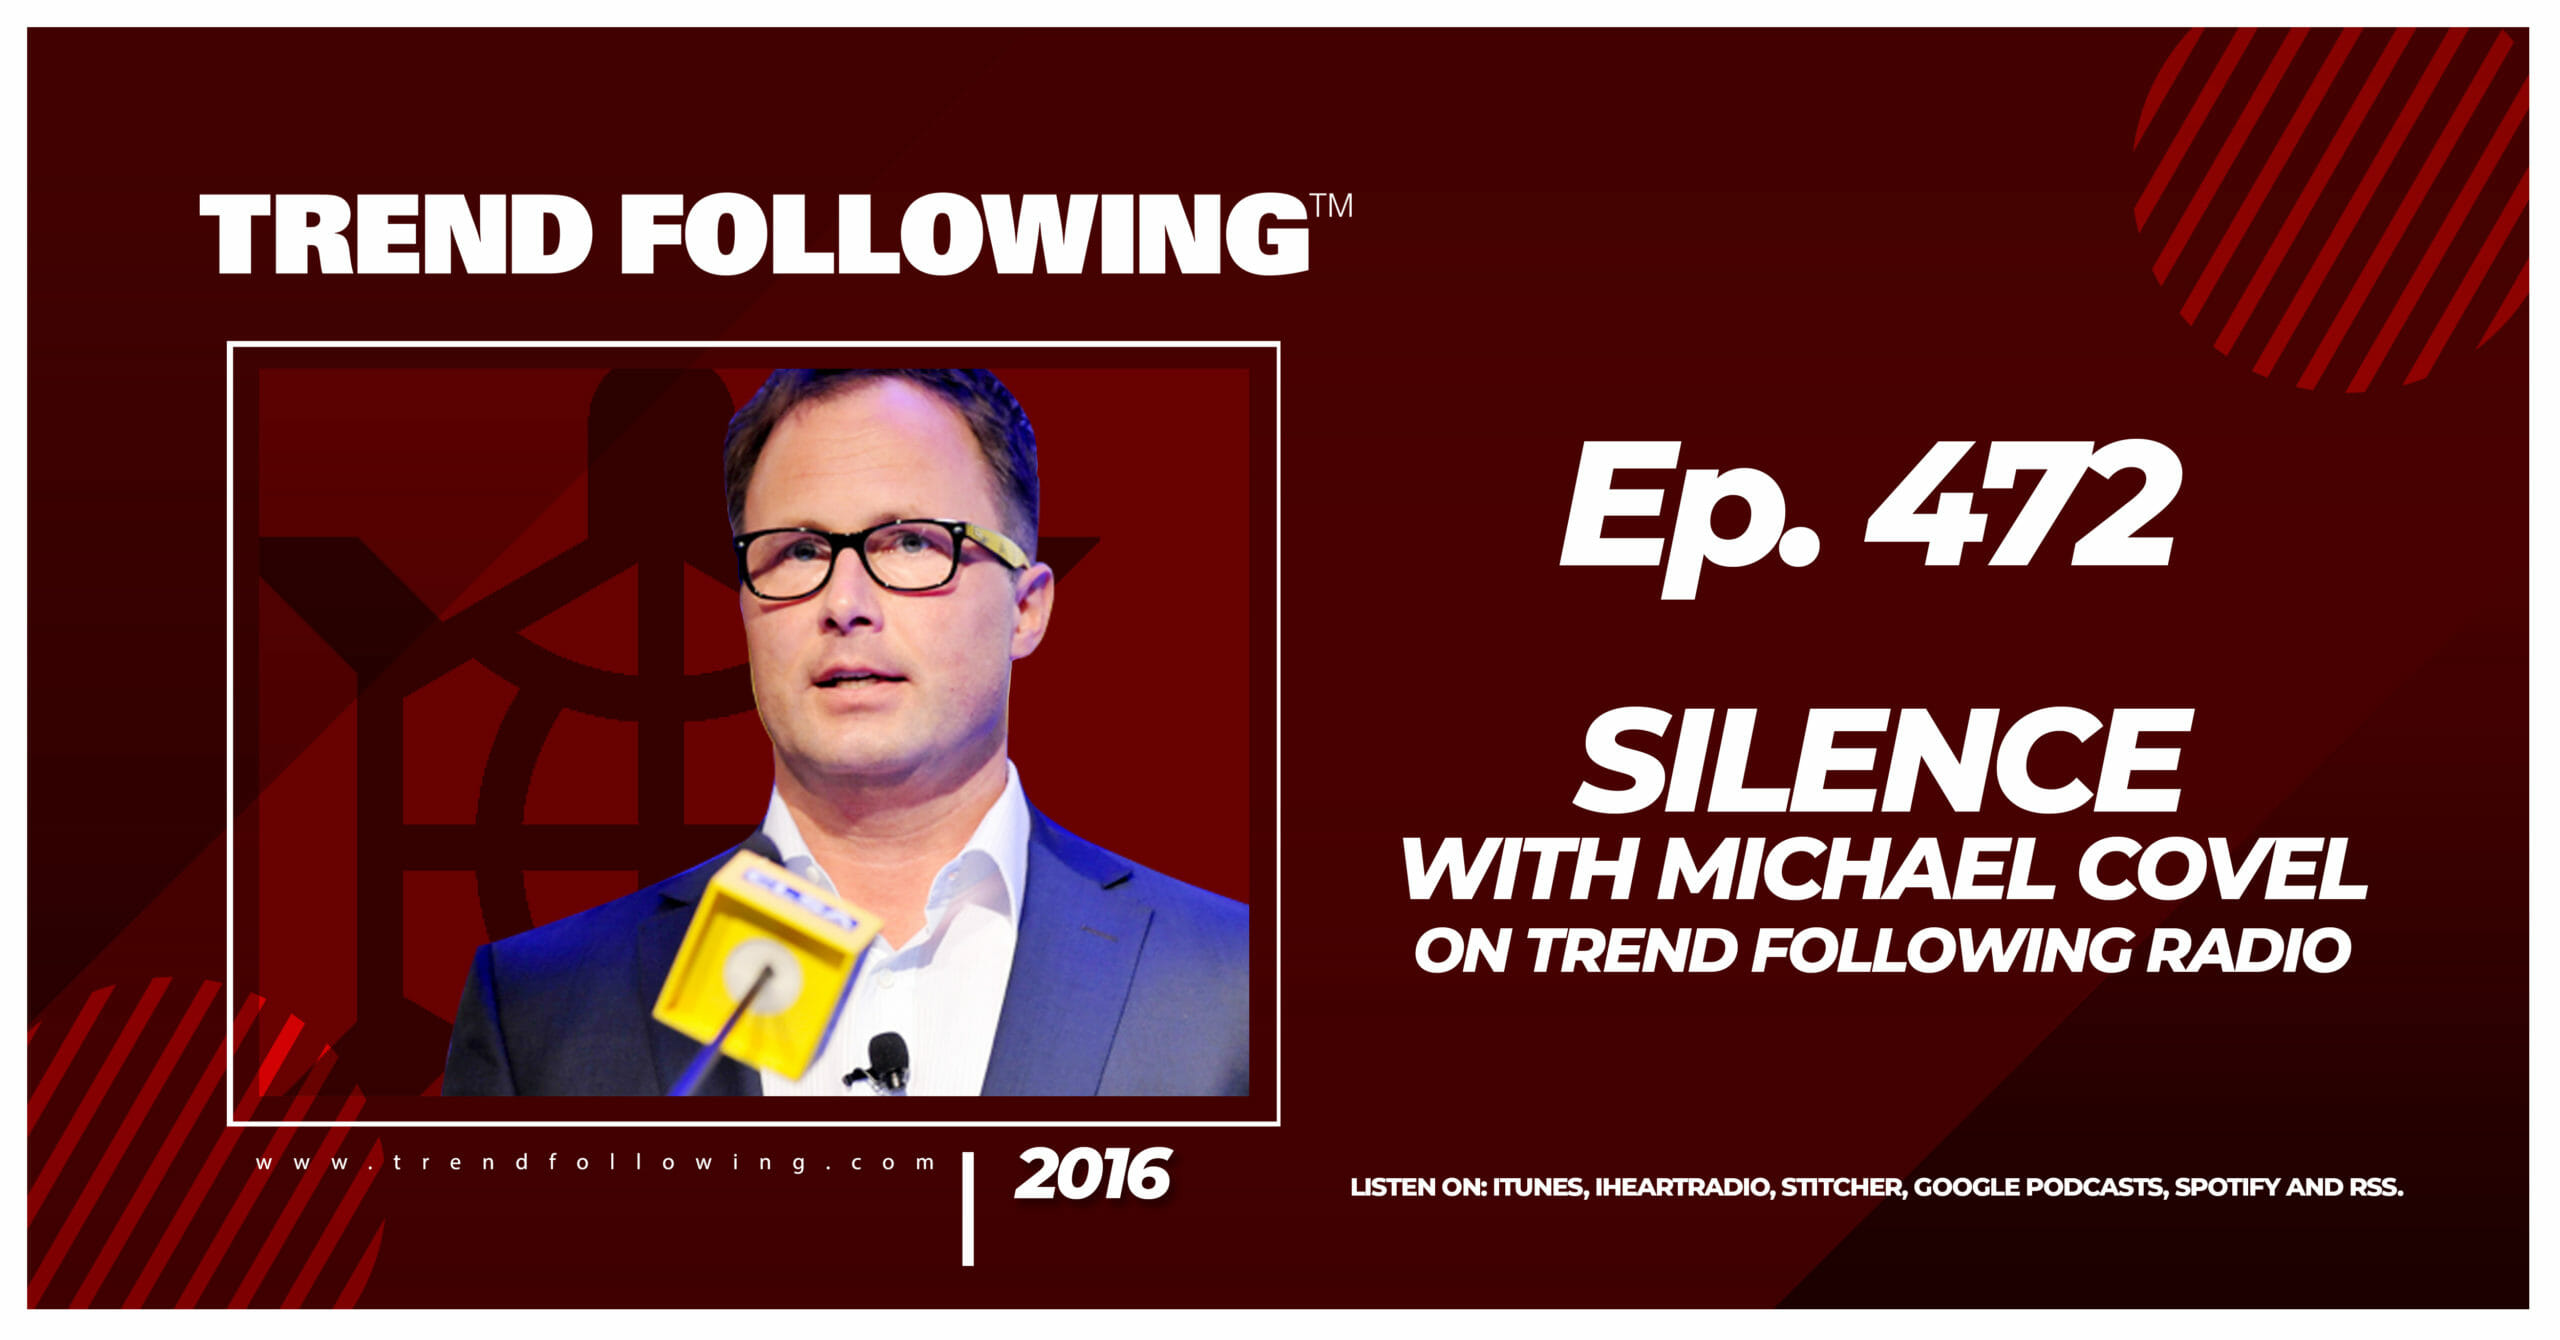 Silence with Michael Covel on Trend Following Radio